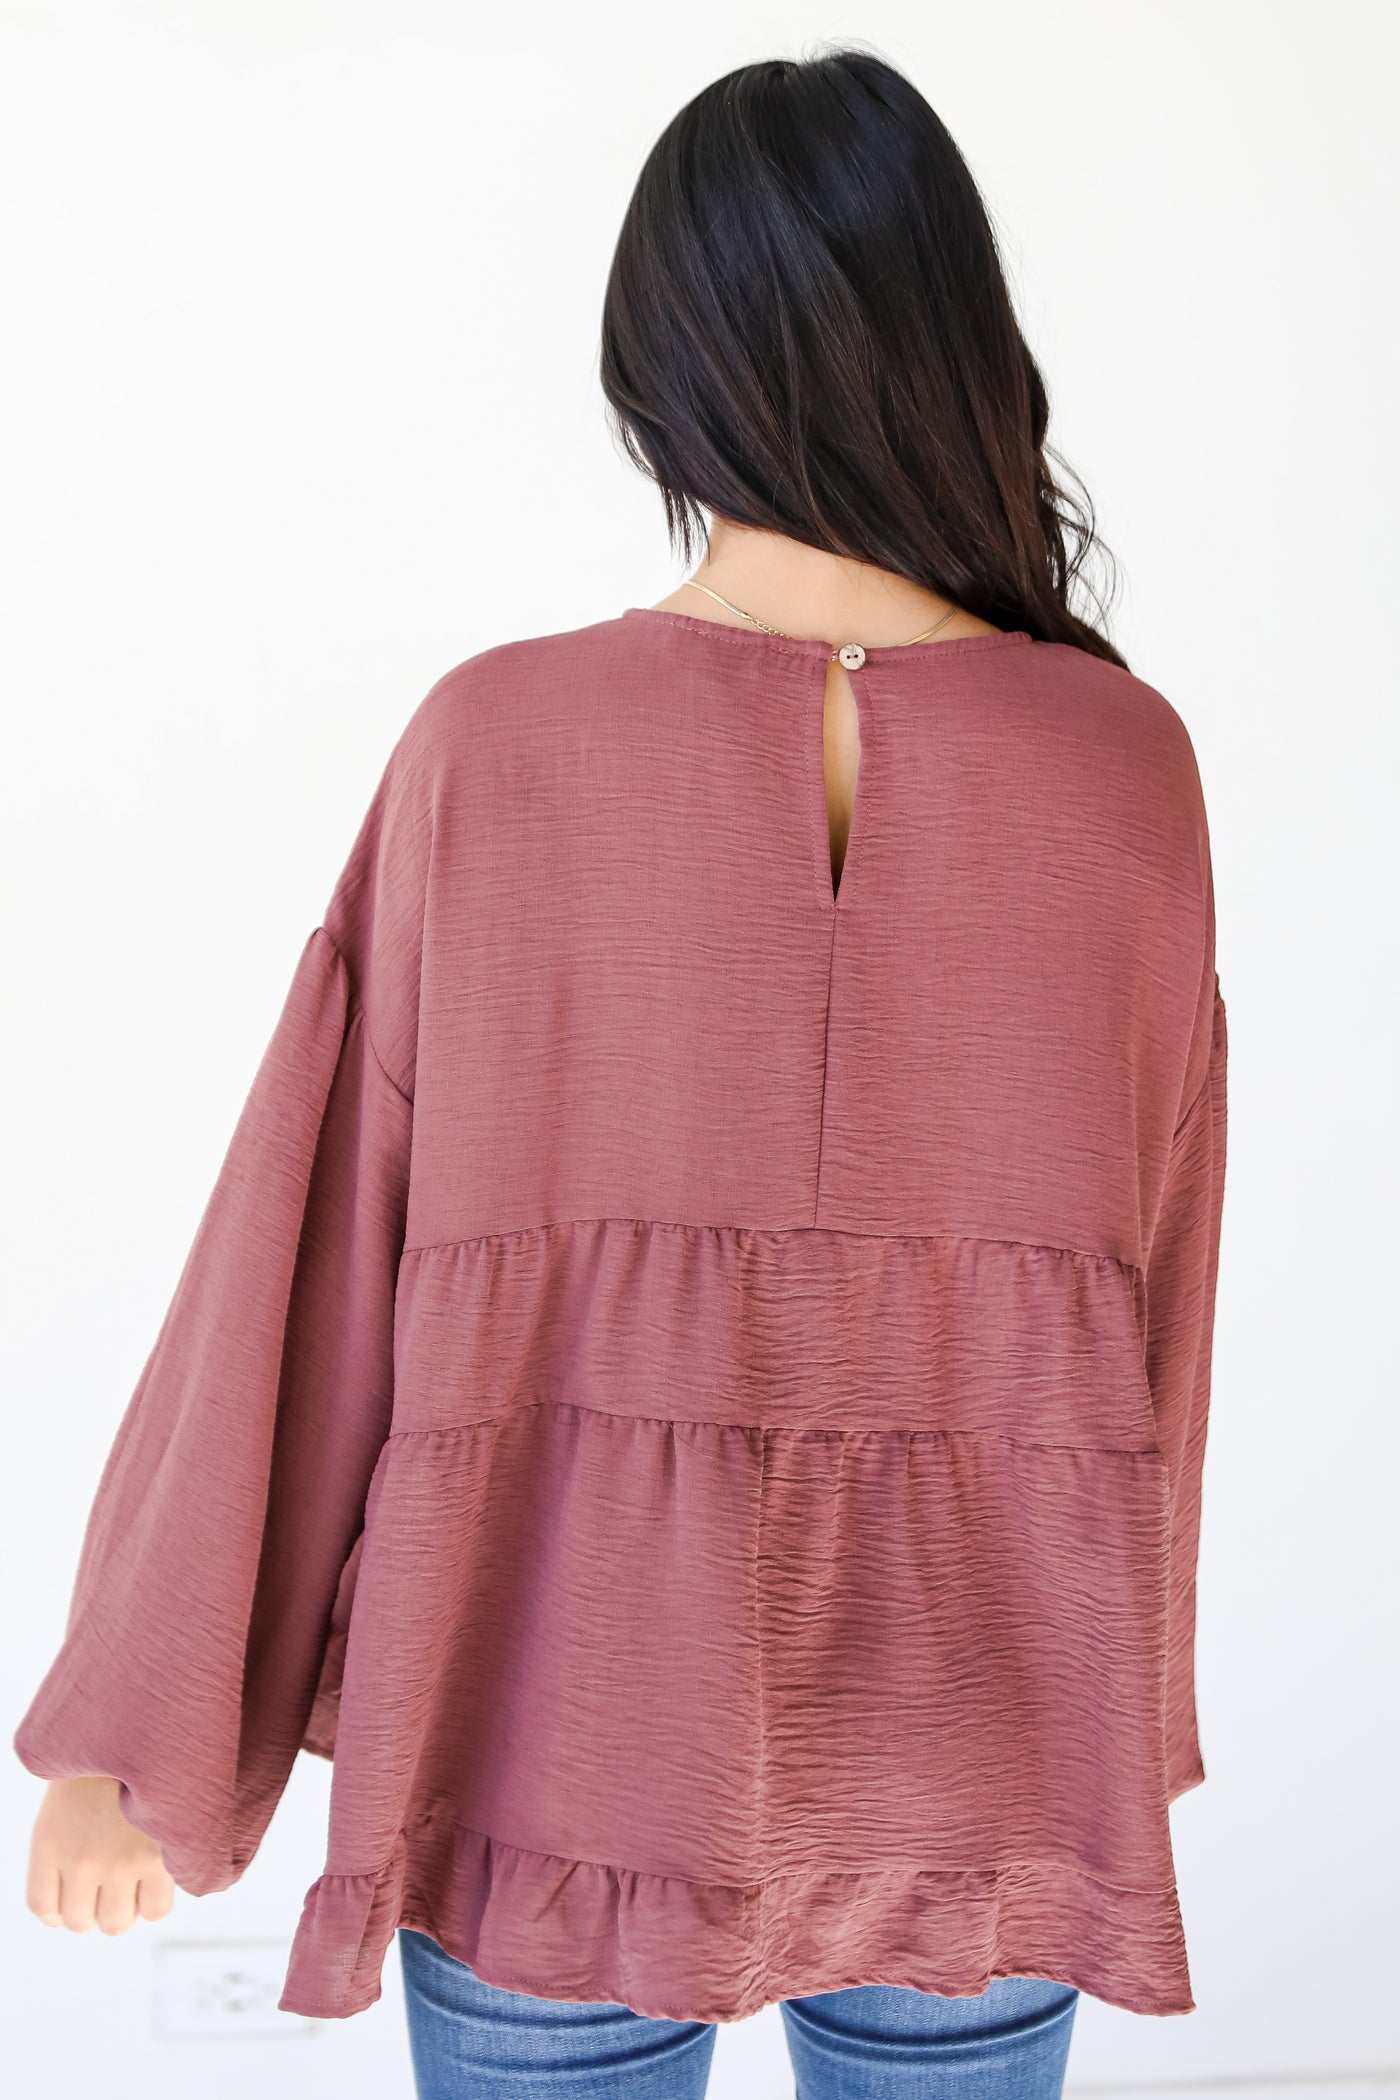 mauve Tiered Blouse back view